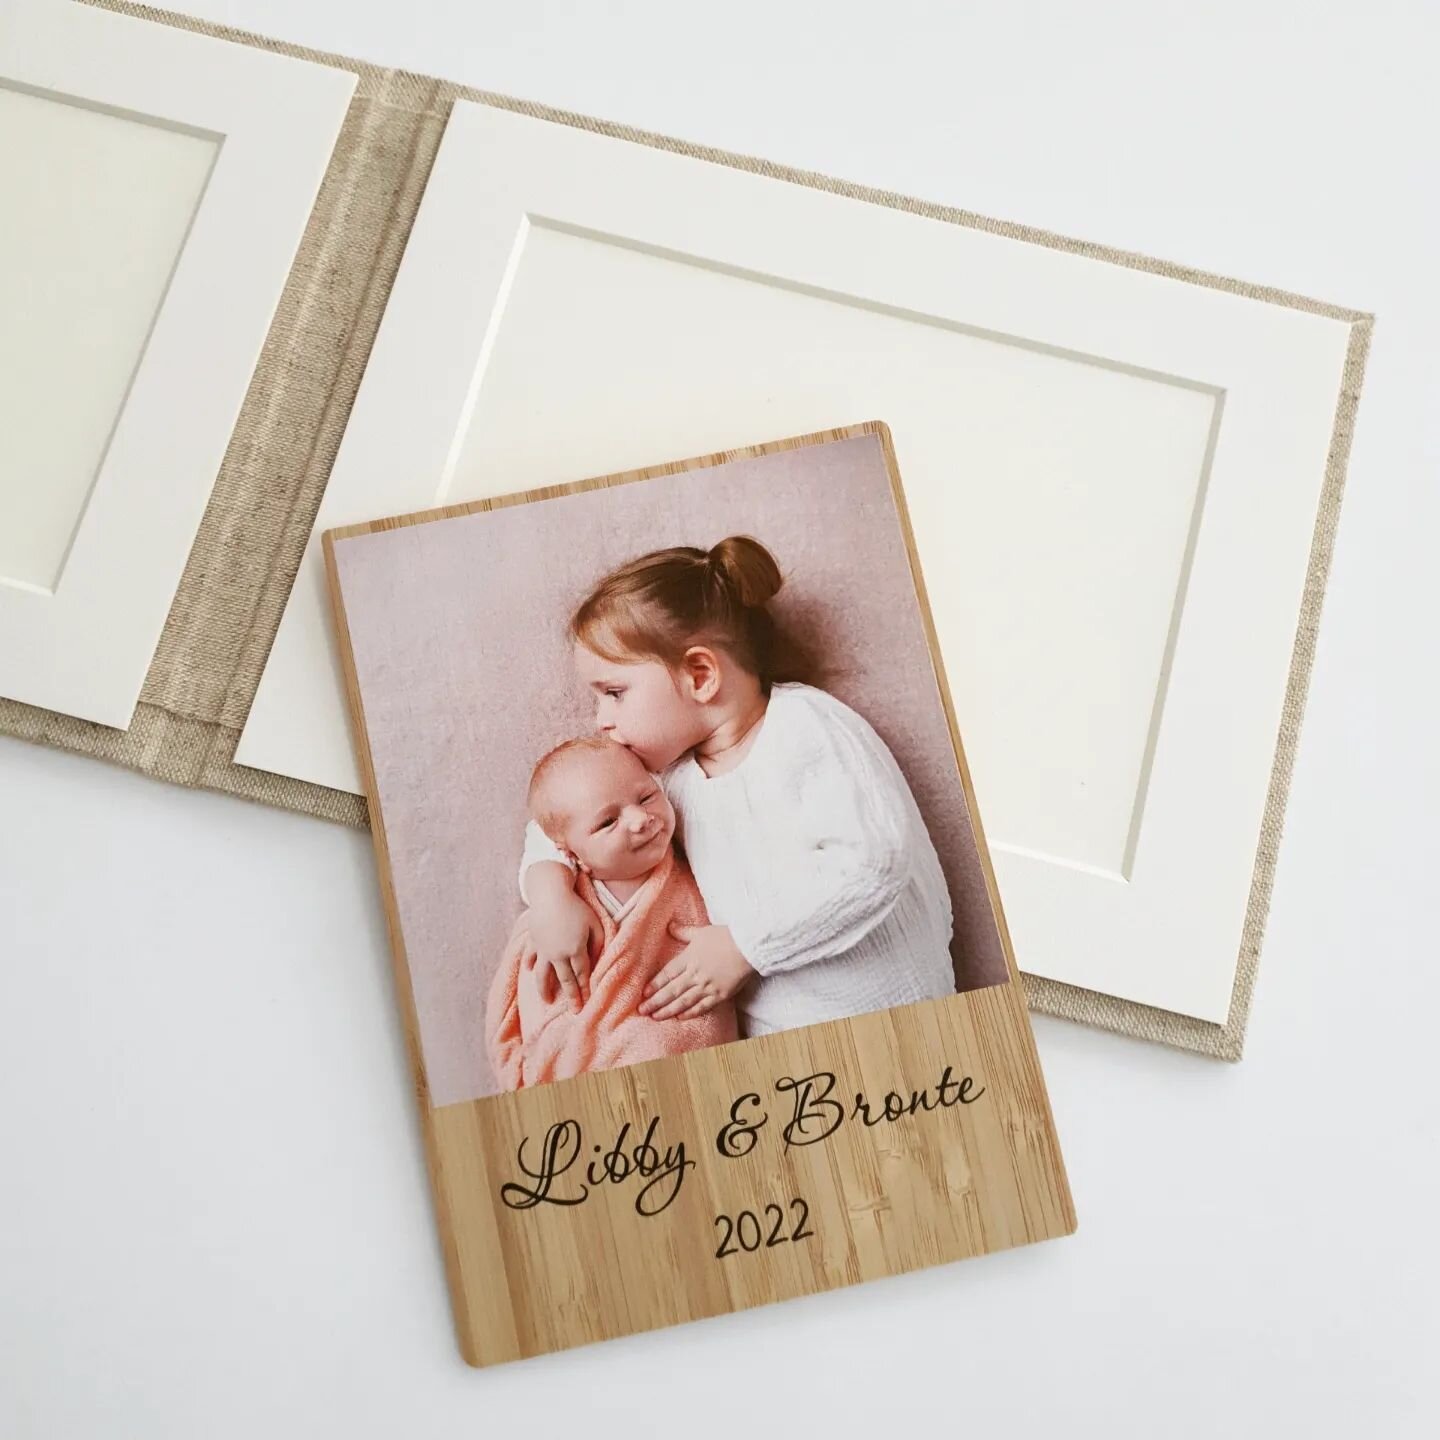 Birth announcement - thank you gift - family add ons.
Our bamboo photo magnets are a fantastic package upgrade product or thank you gift.  If your clients are looking for something special to give out to family, these are perfect. 

Adding your logo 